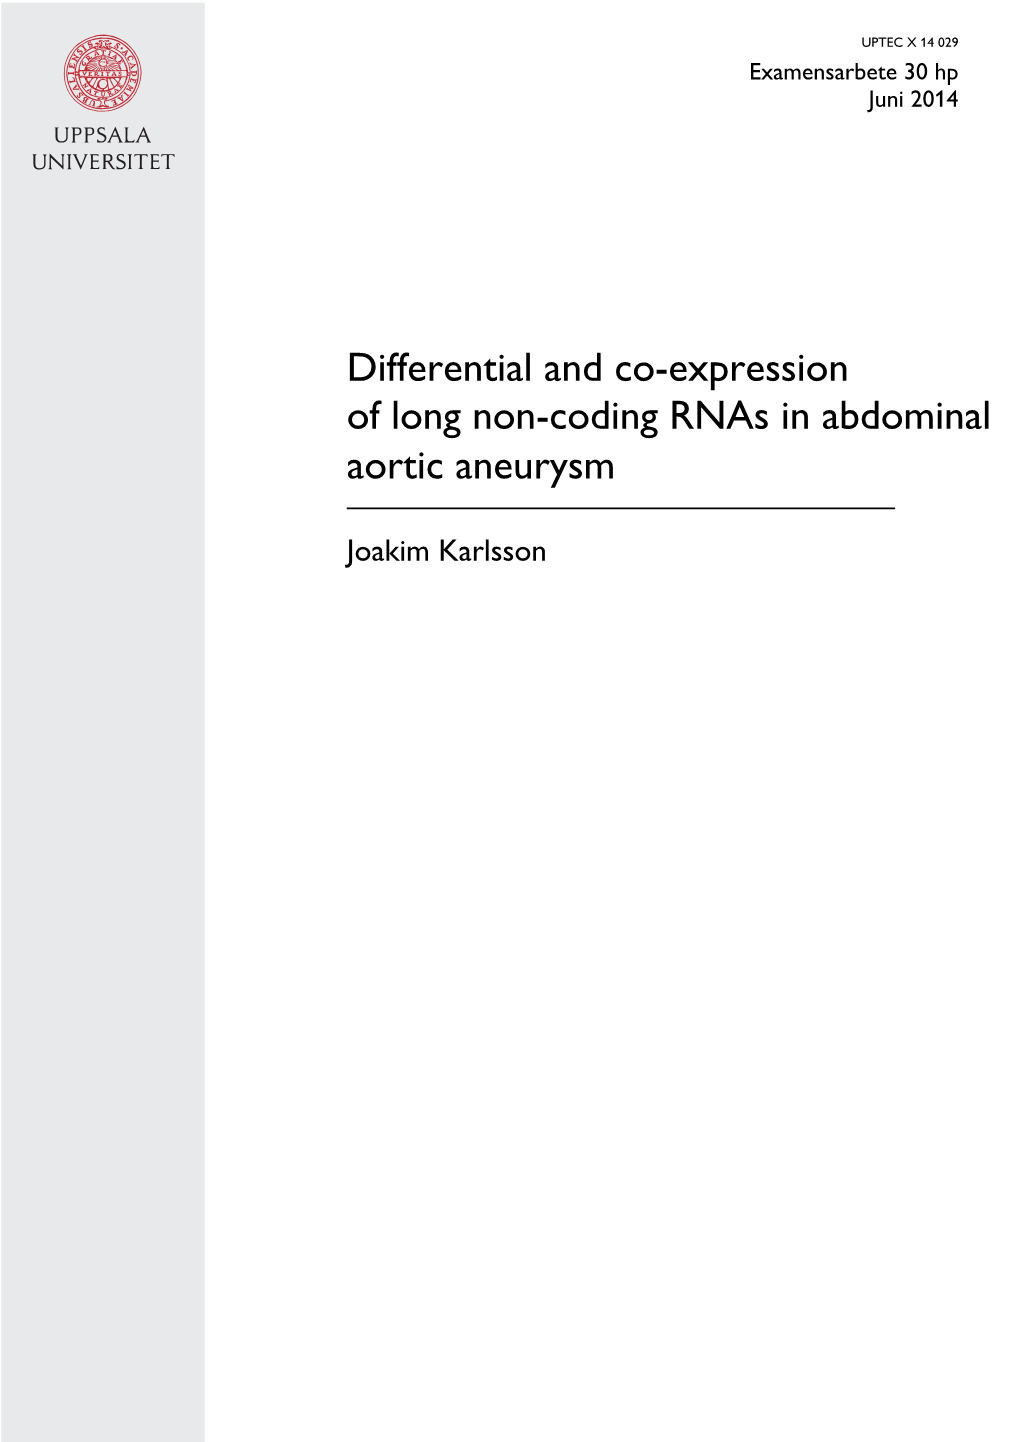 Differential and Co-Expression of Long Non-Coding Rnas in Abdominal Aortic Aneurysm